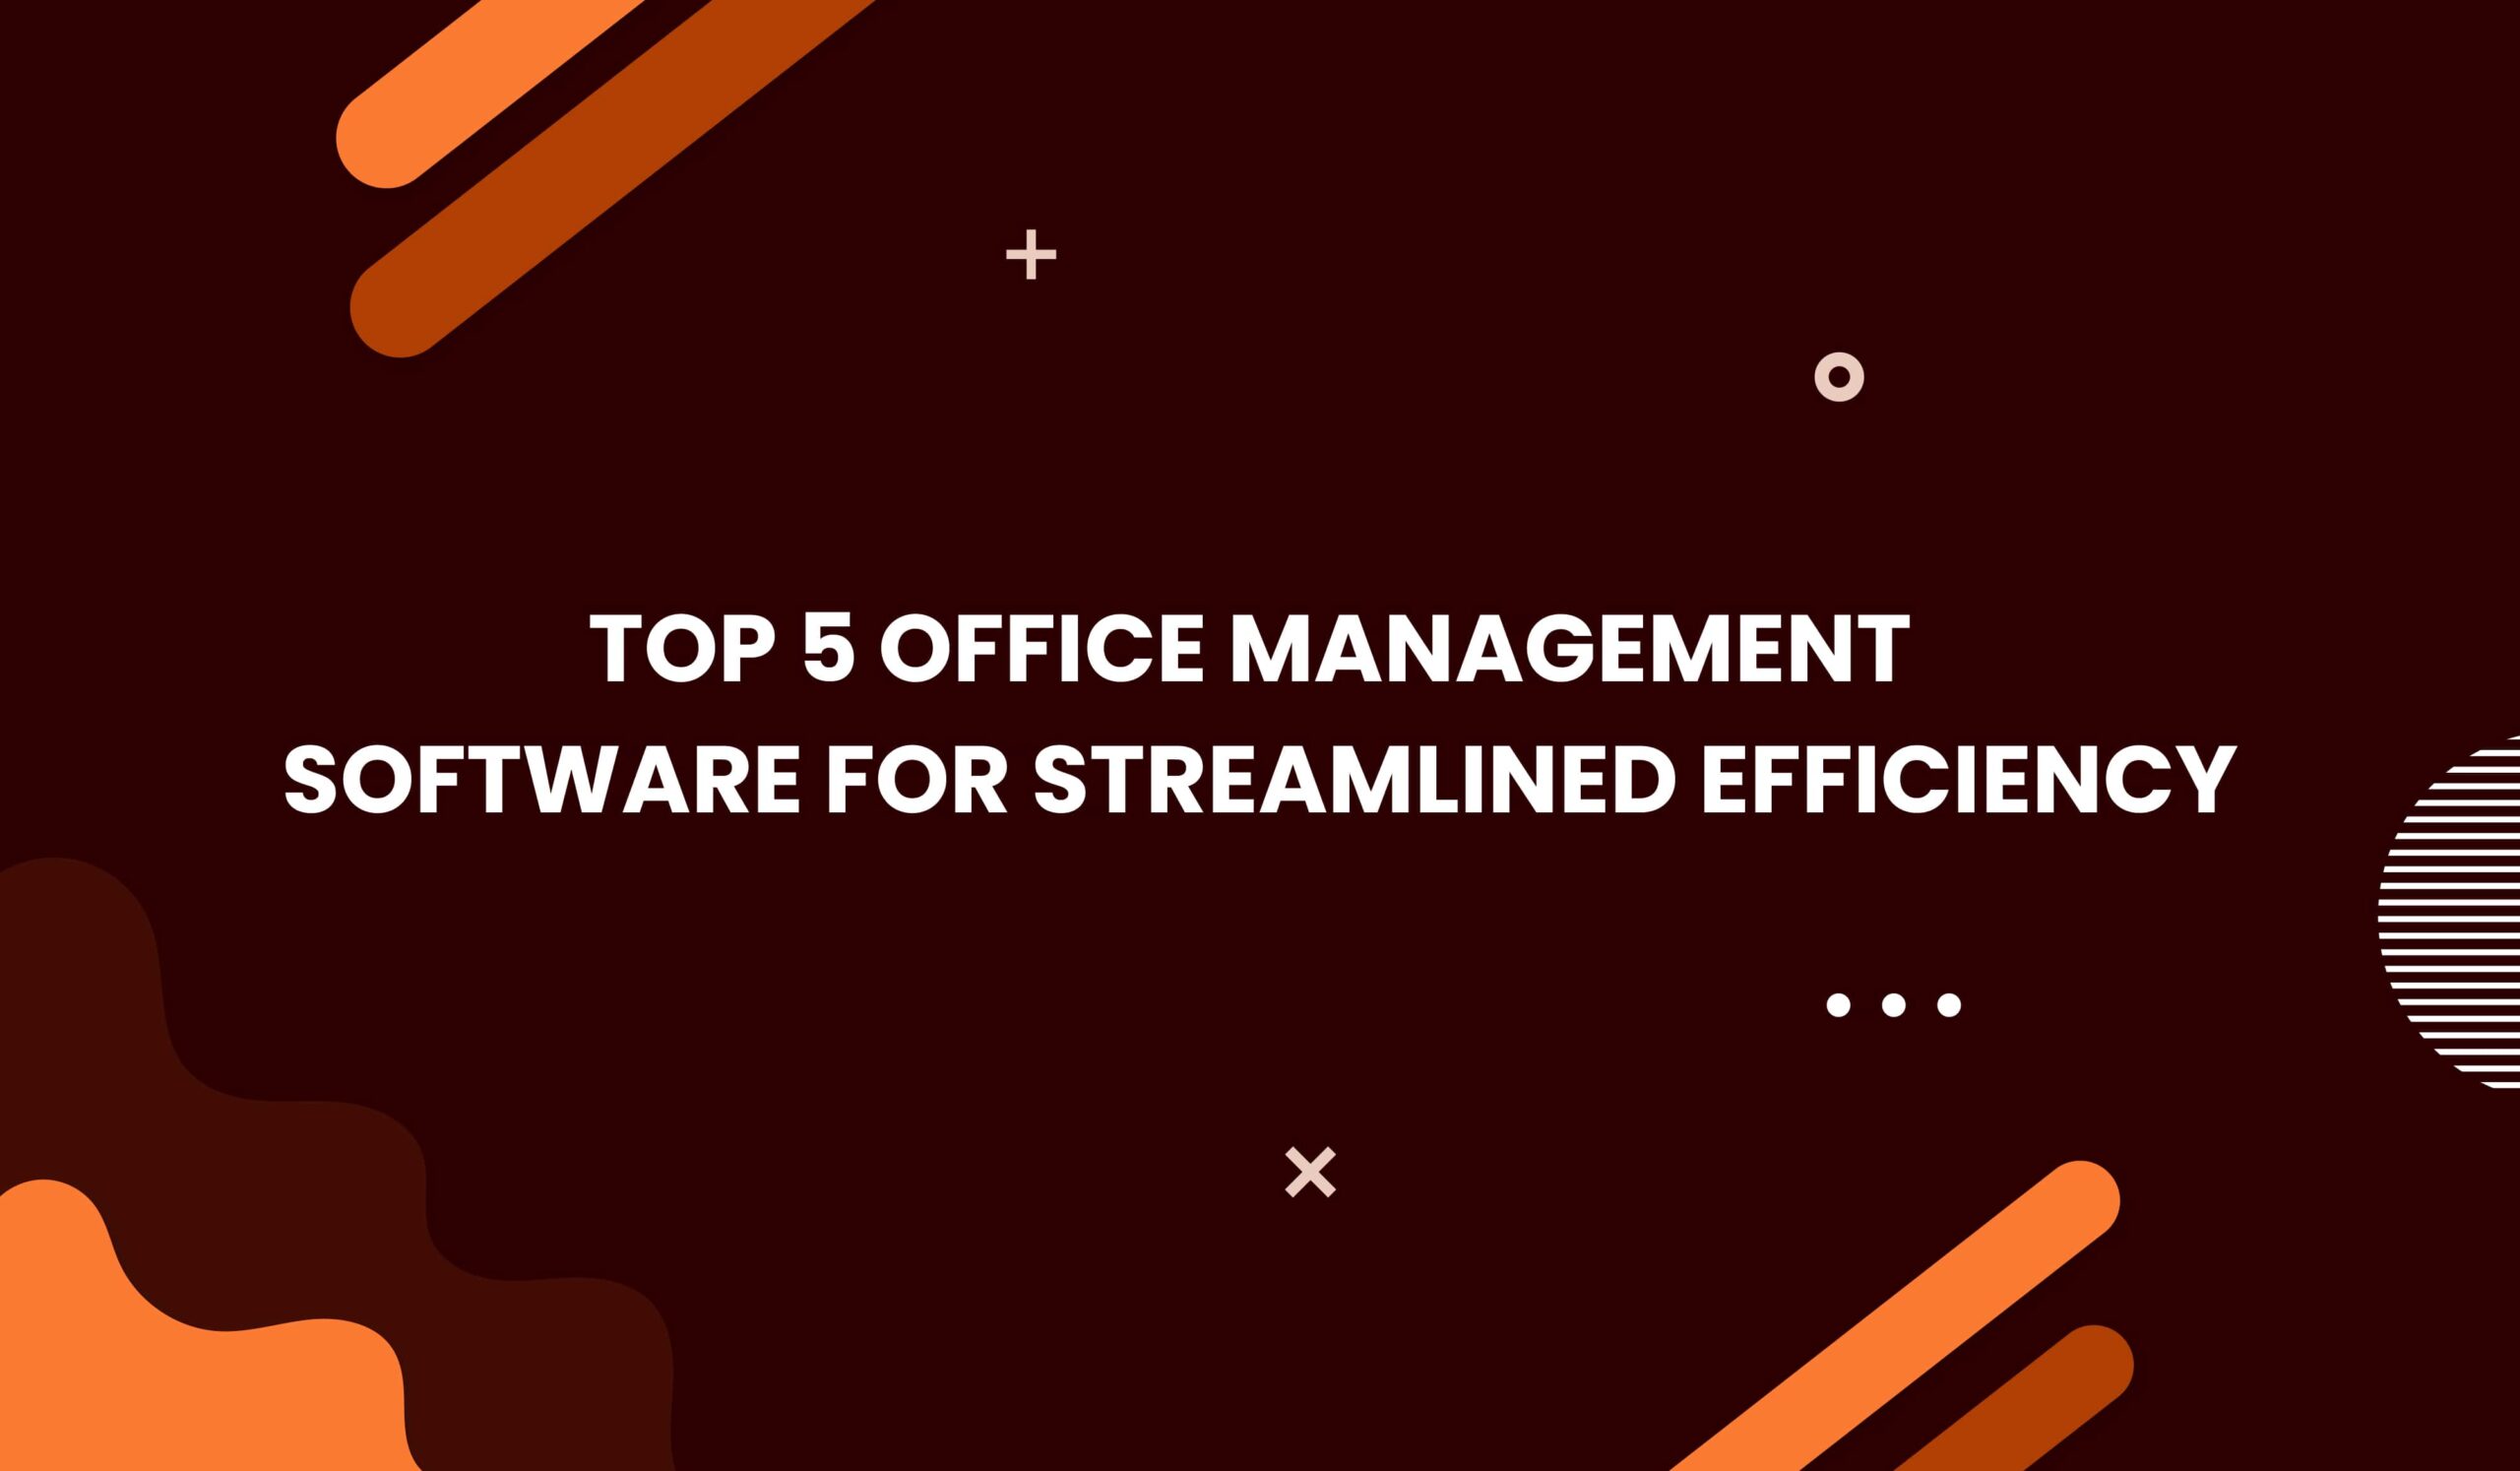 Top 5 Office Management Software for Streamlined Efficiency